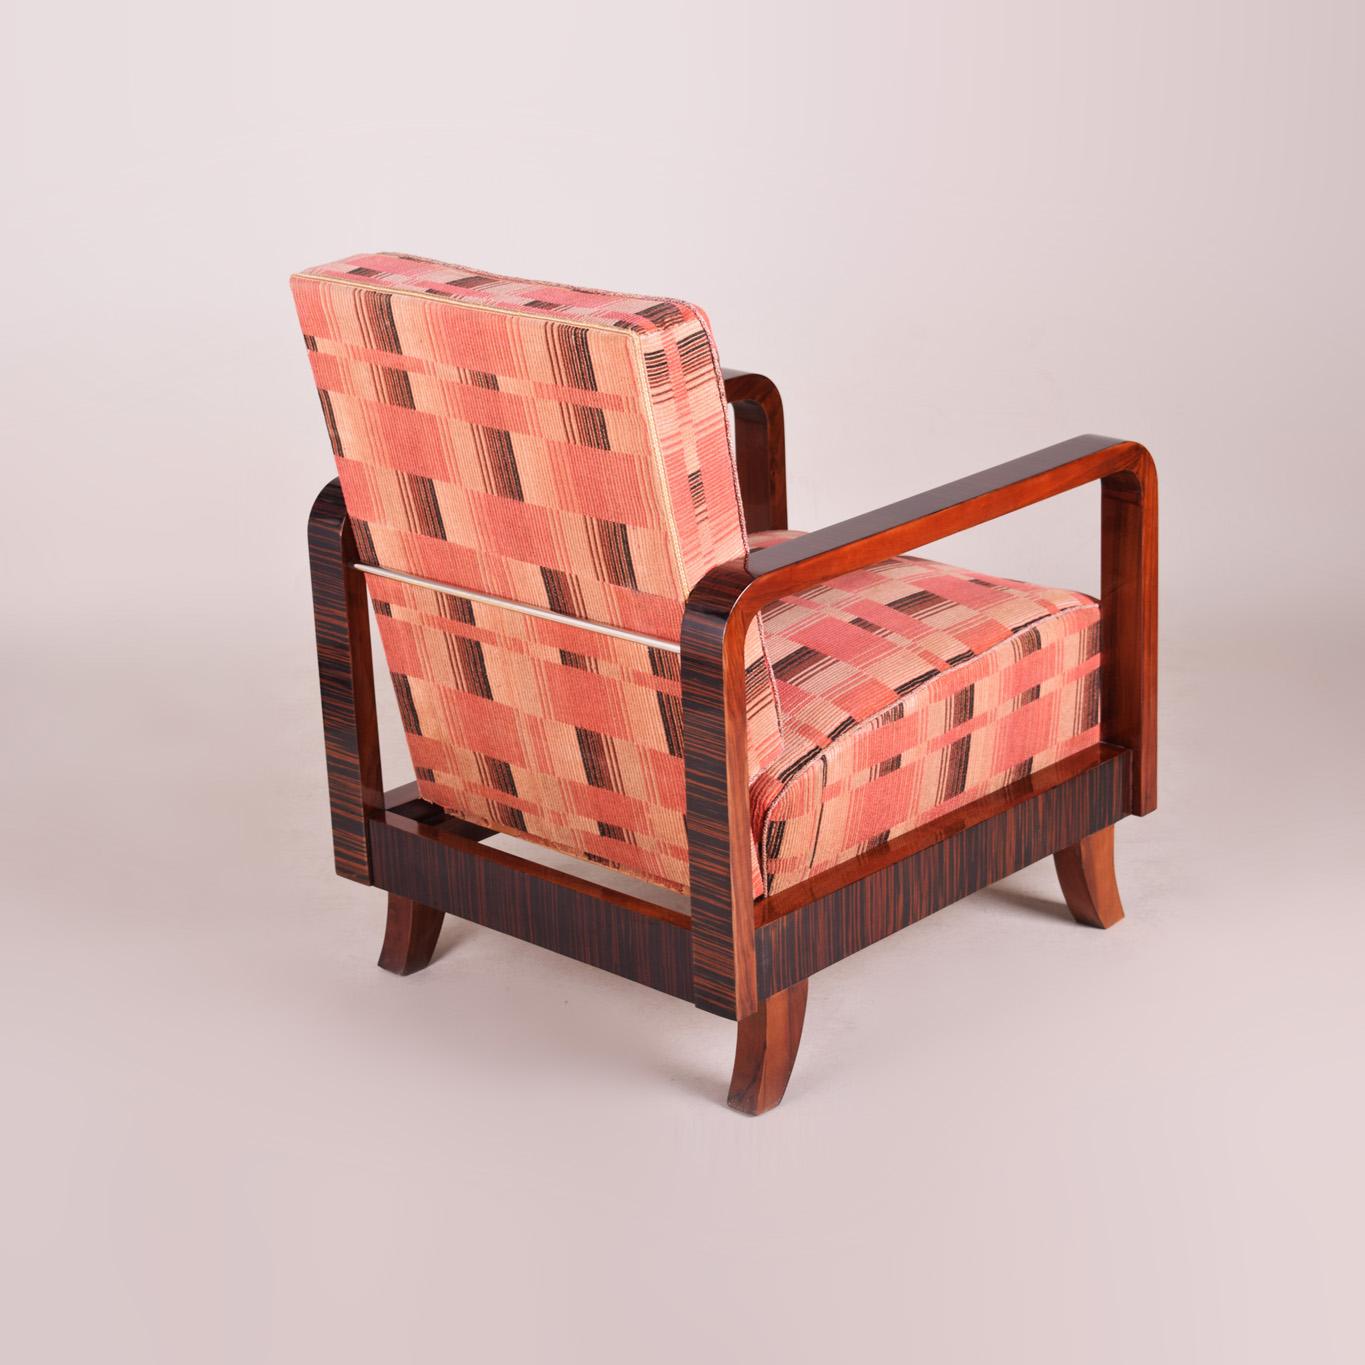 Pink Art Deco Armchair, Made in 1930s Czechia and Restored, Original Fabric For Sale 2